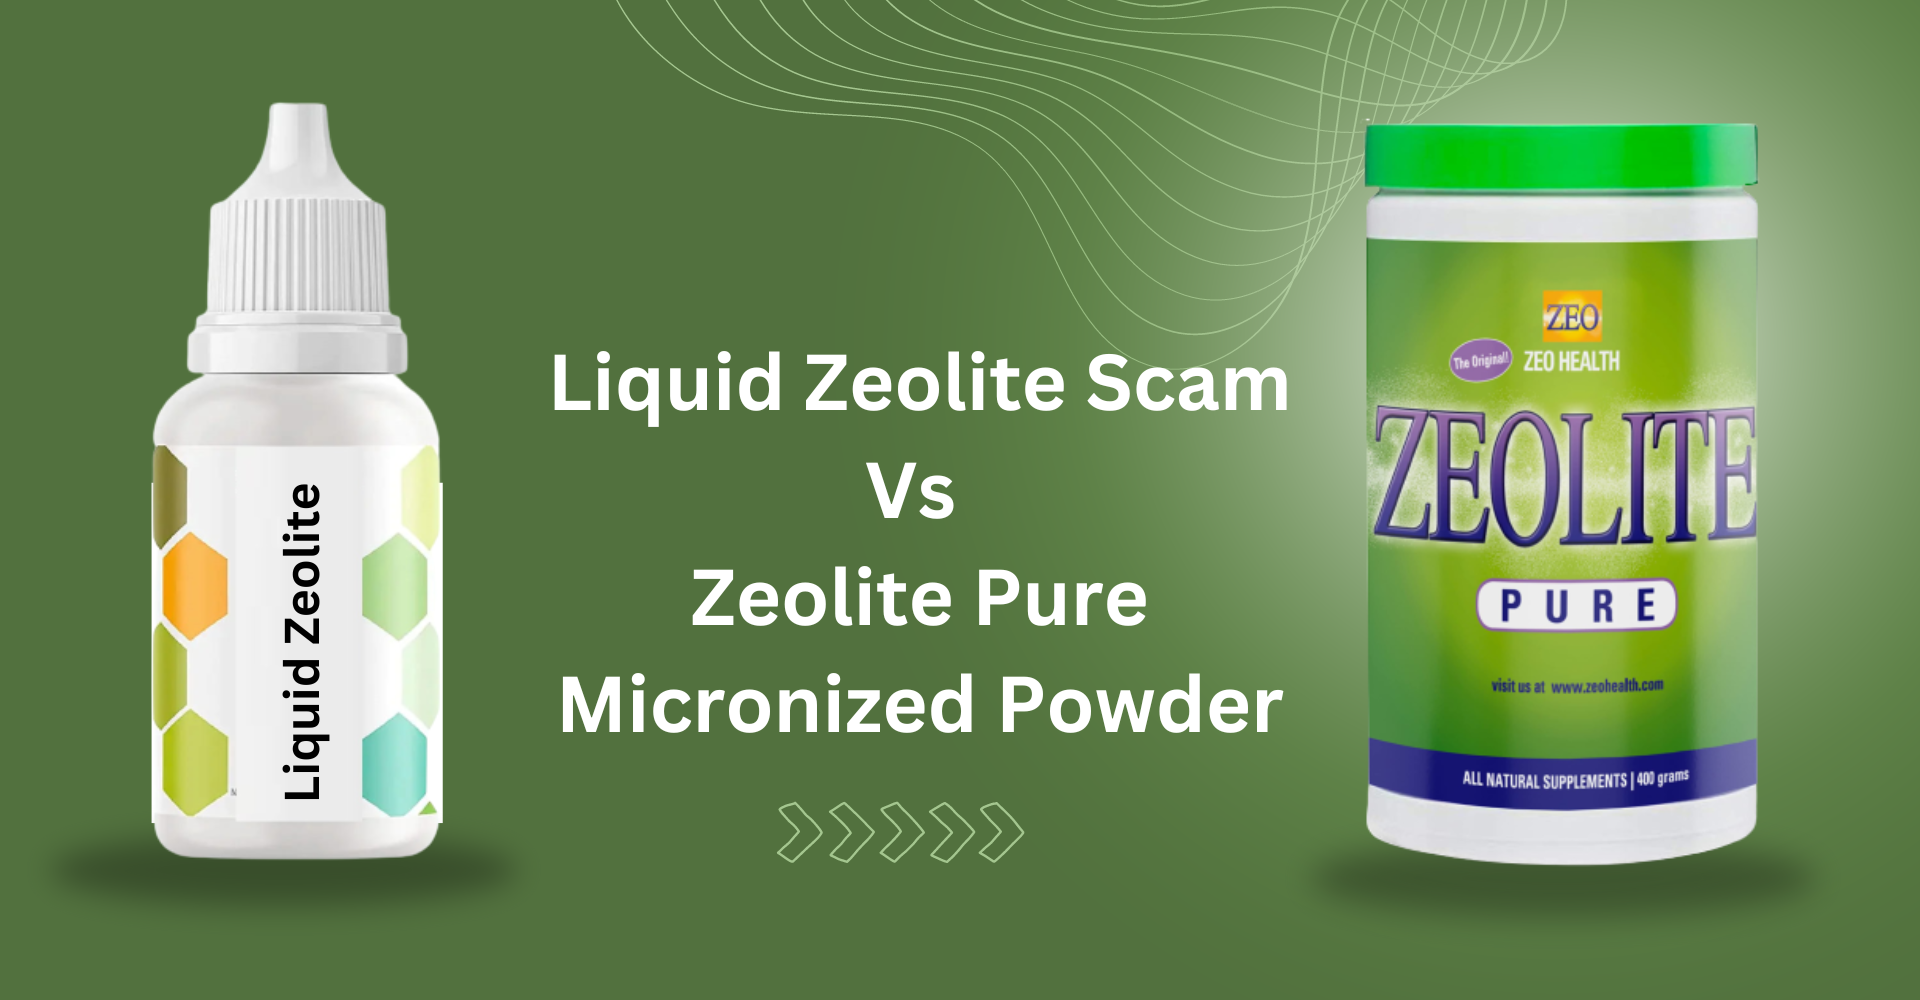 Don't get ripped off by MLM liquid zeolite scam companies